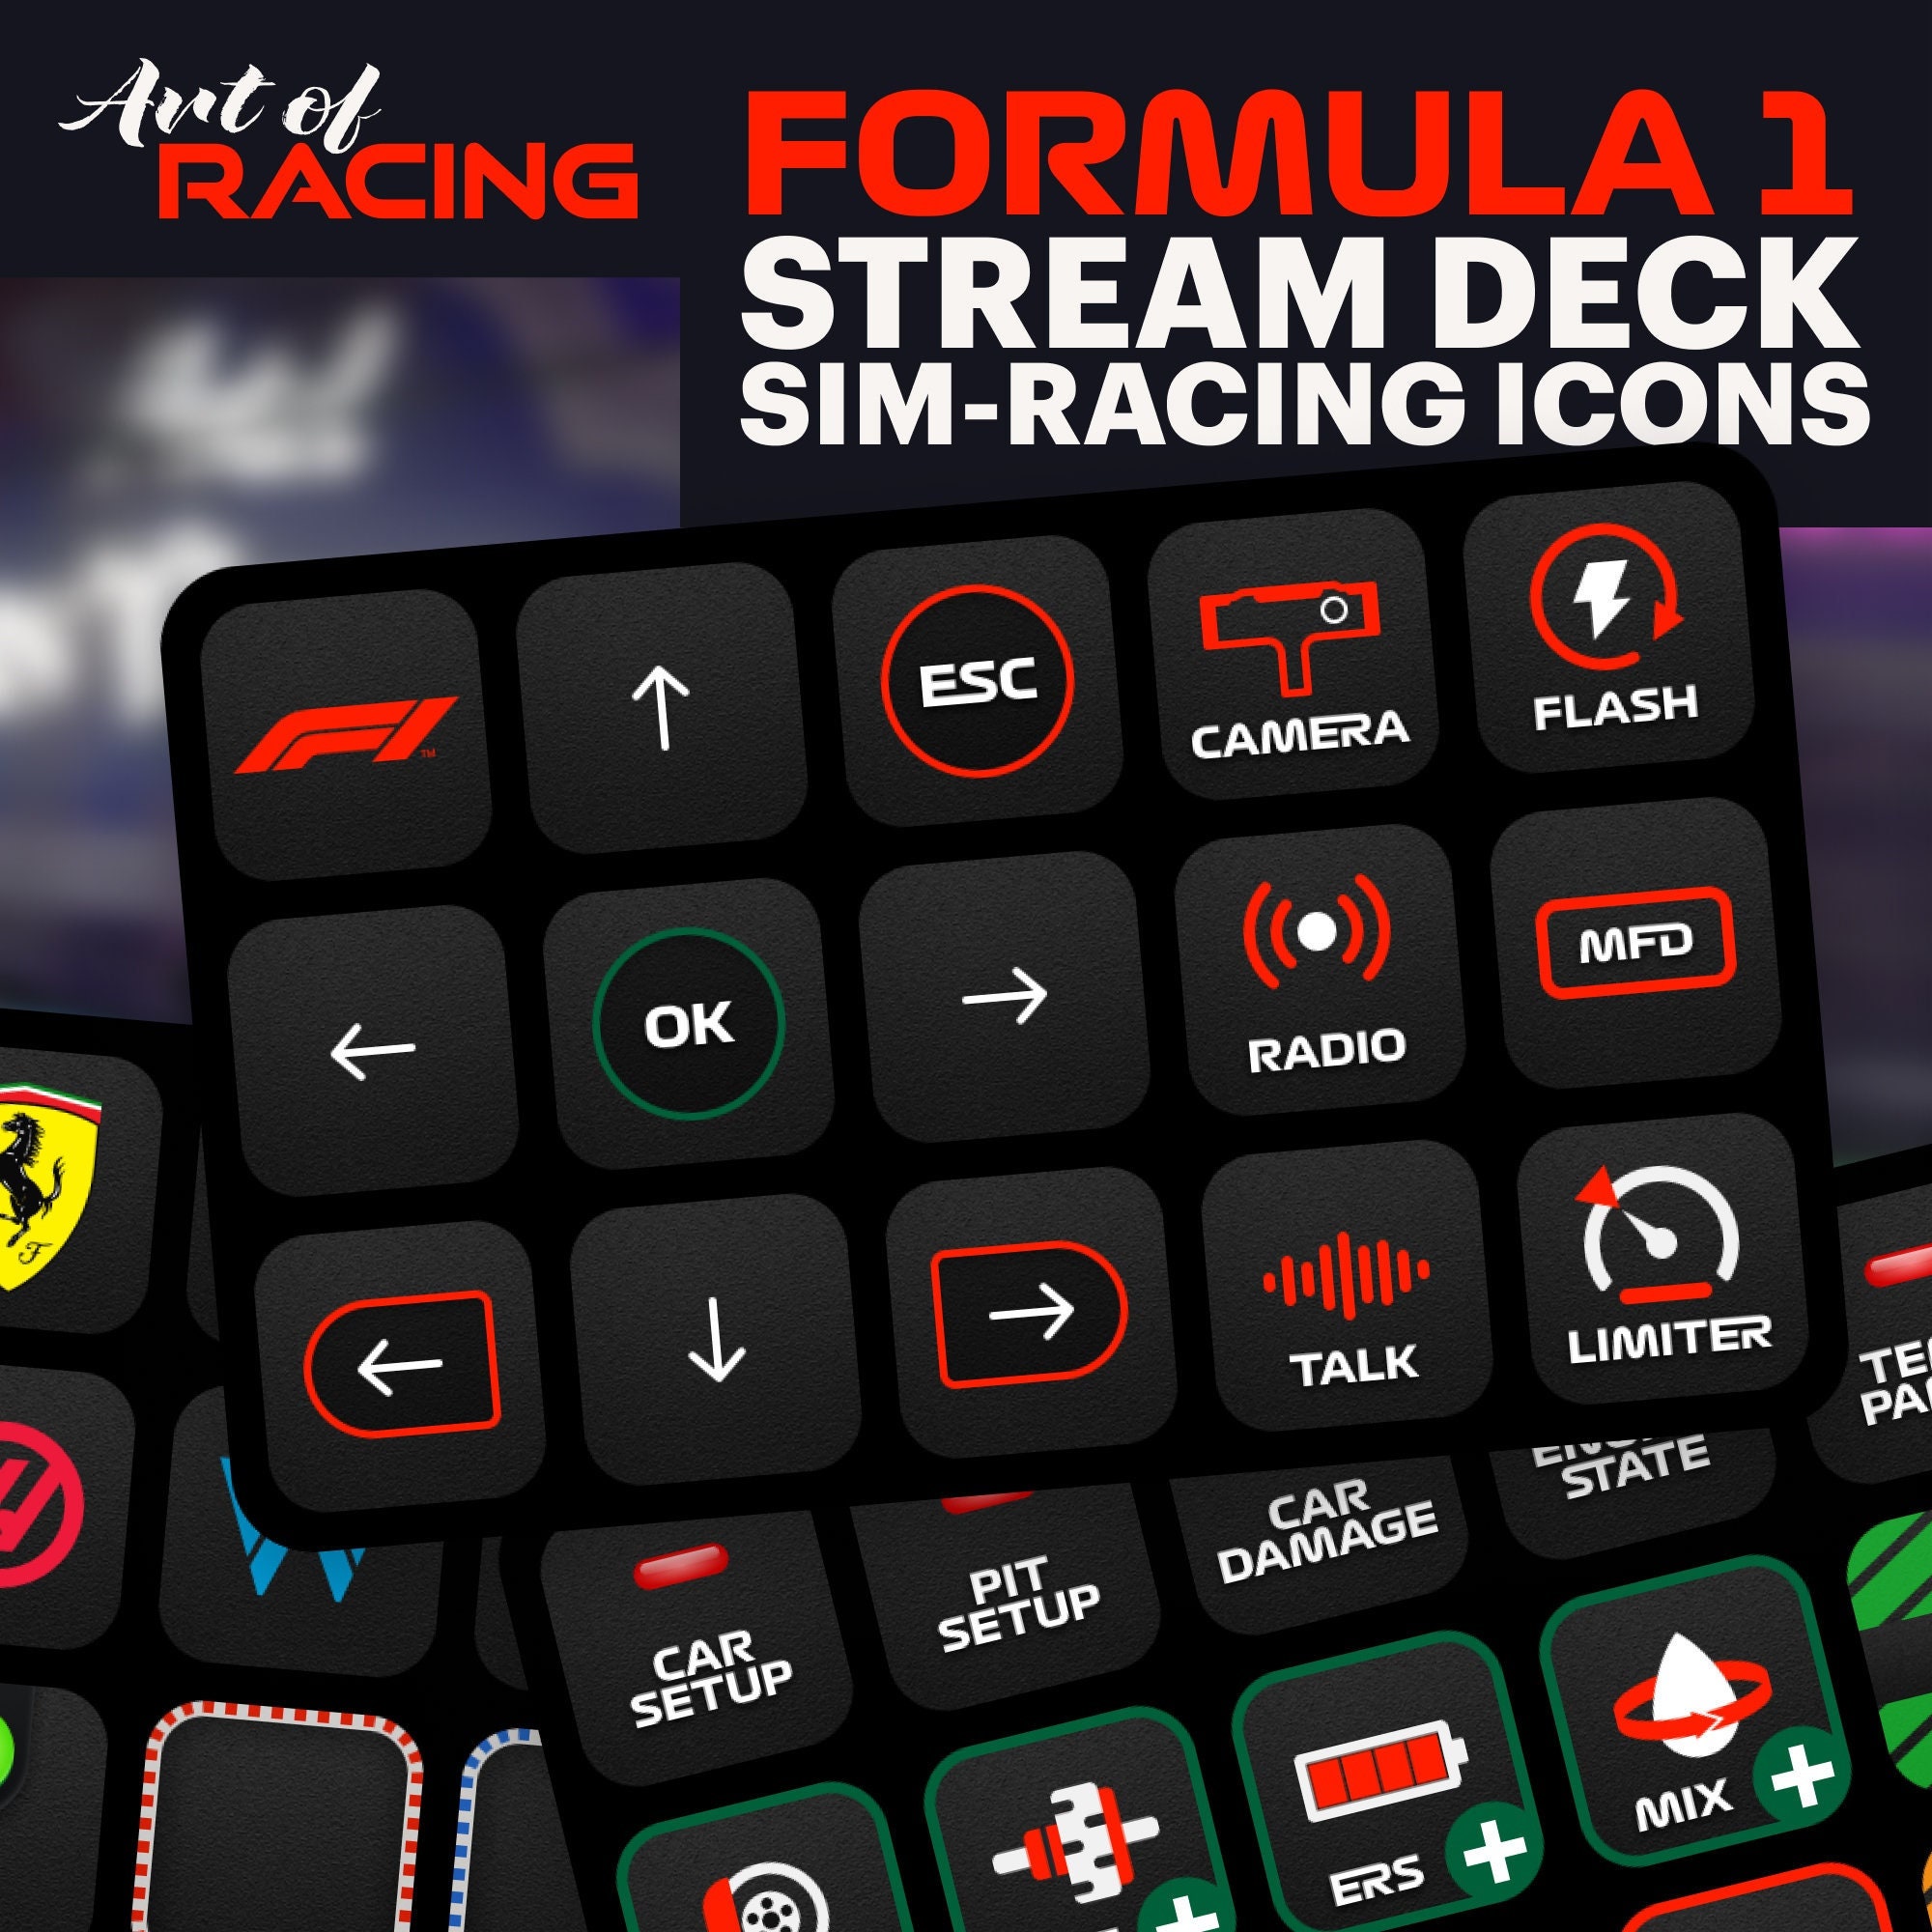 Stream Deck Formula 1 Inspired Sim-racing Icons for F1 Games